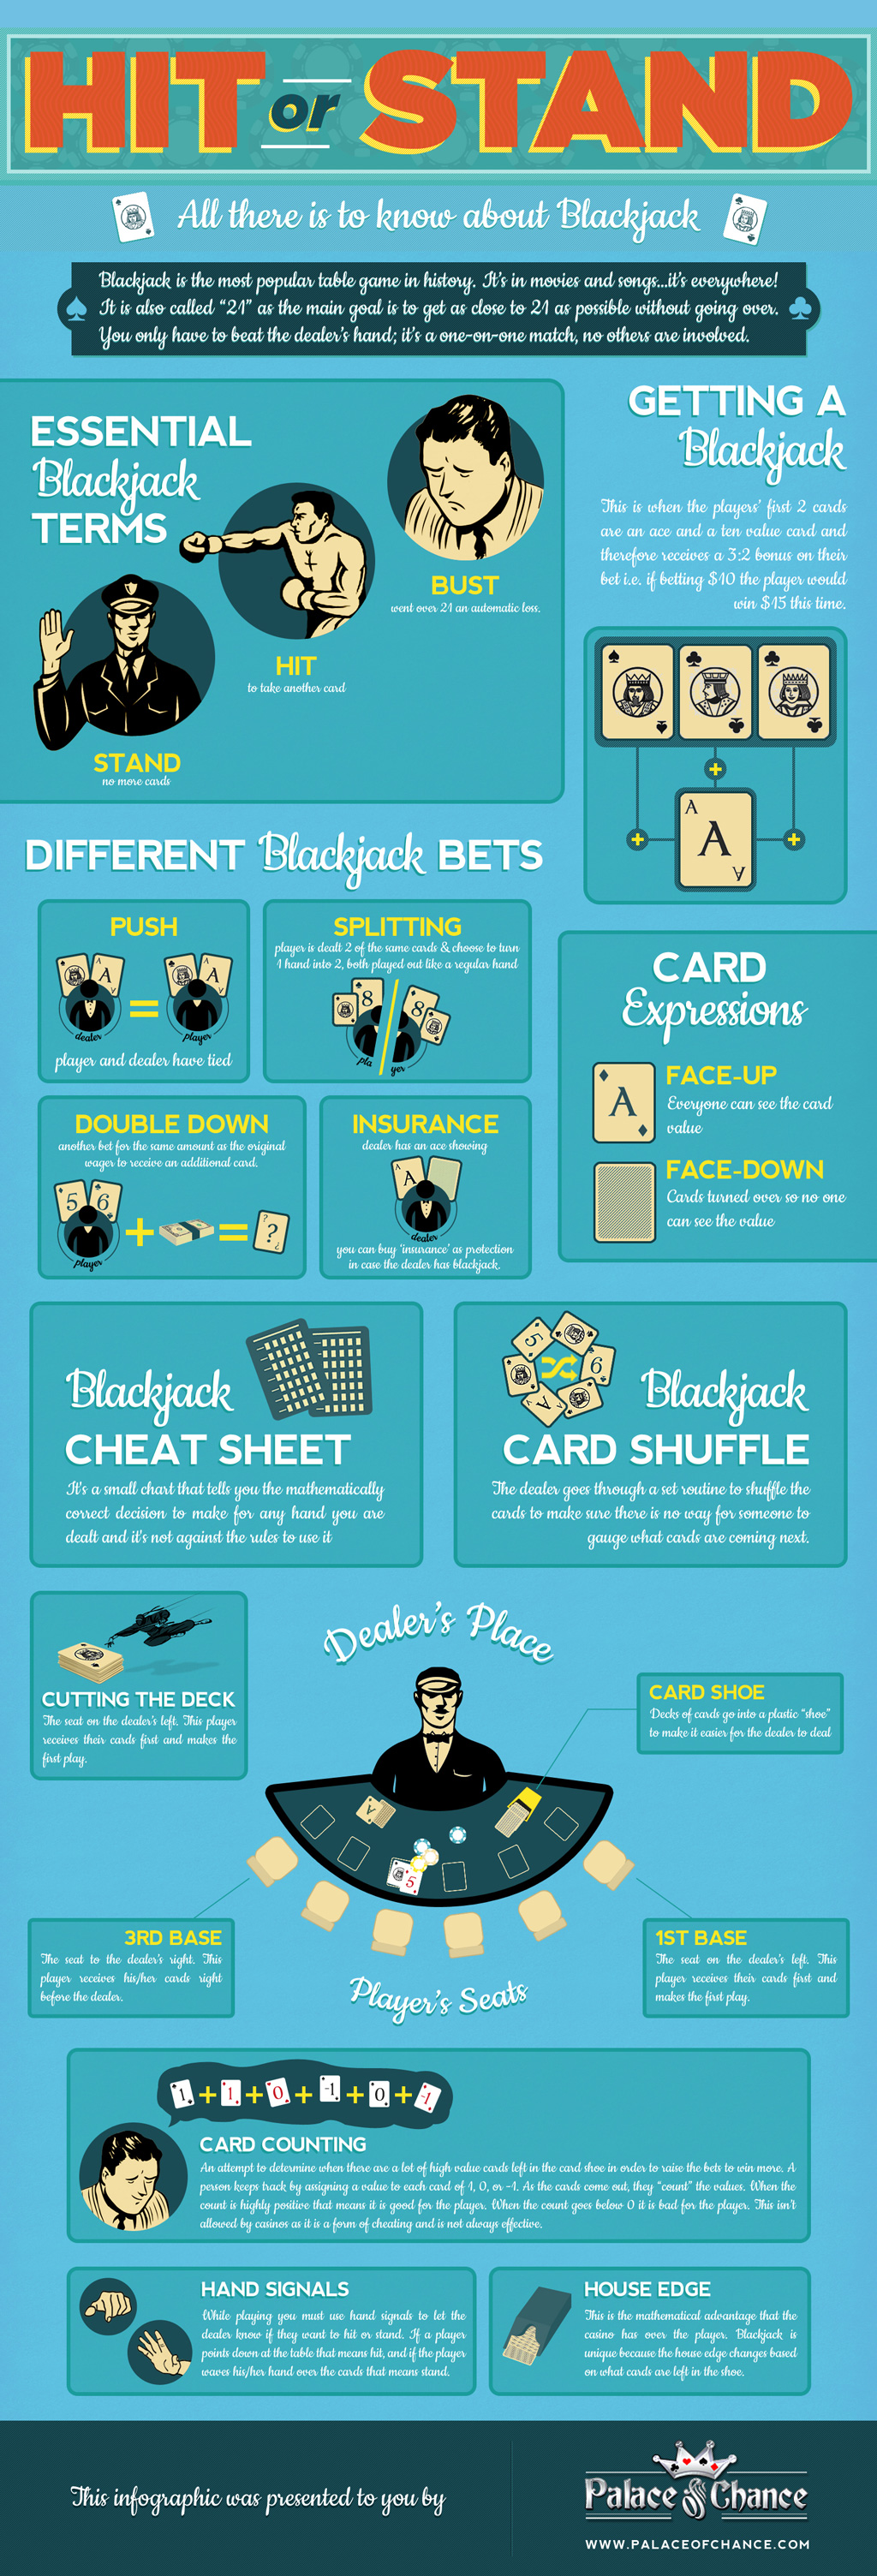 Blackjack: Hit or Stand? - Infographic